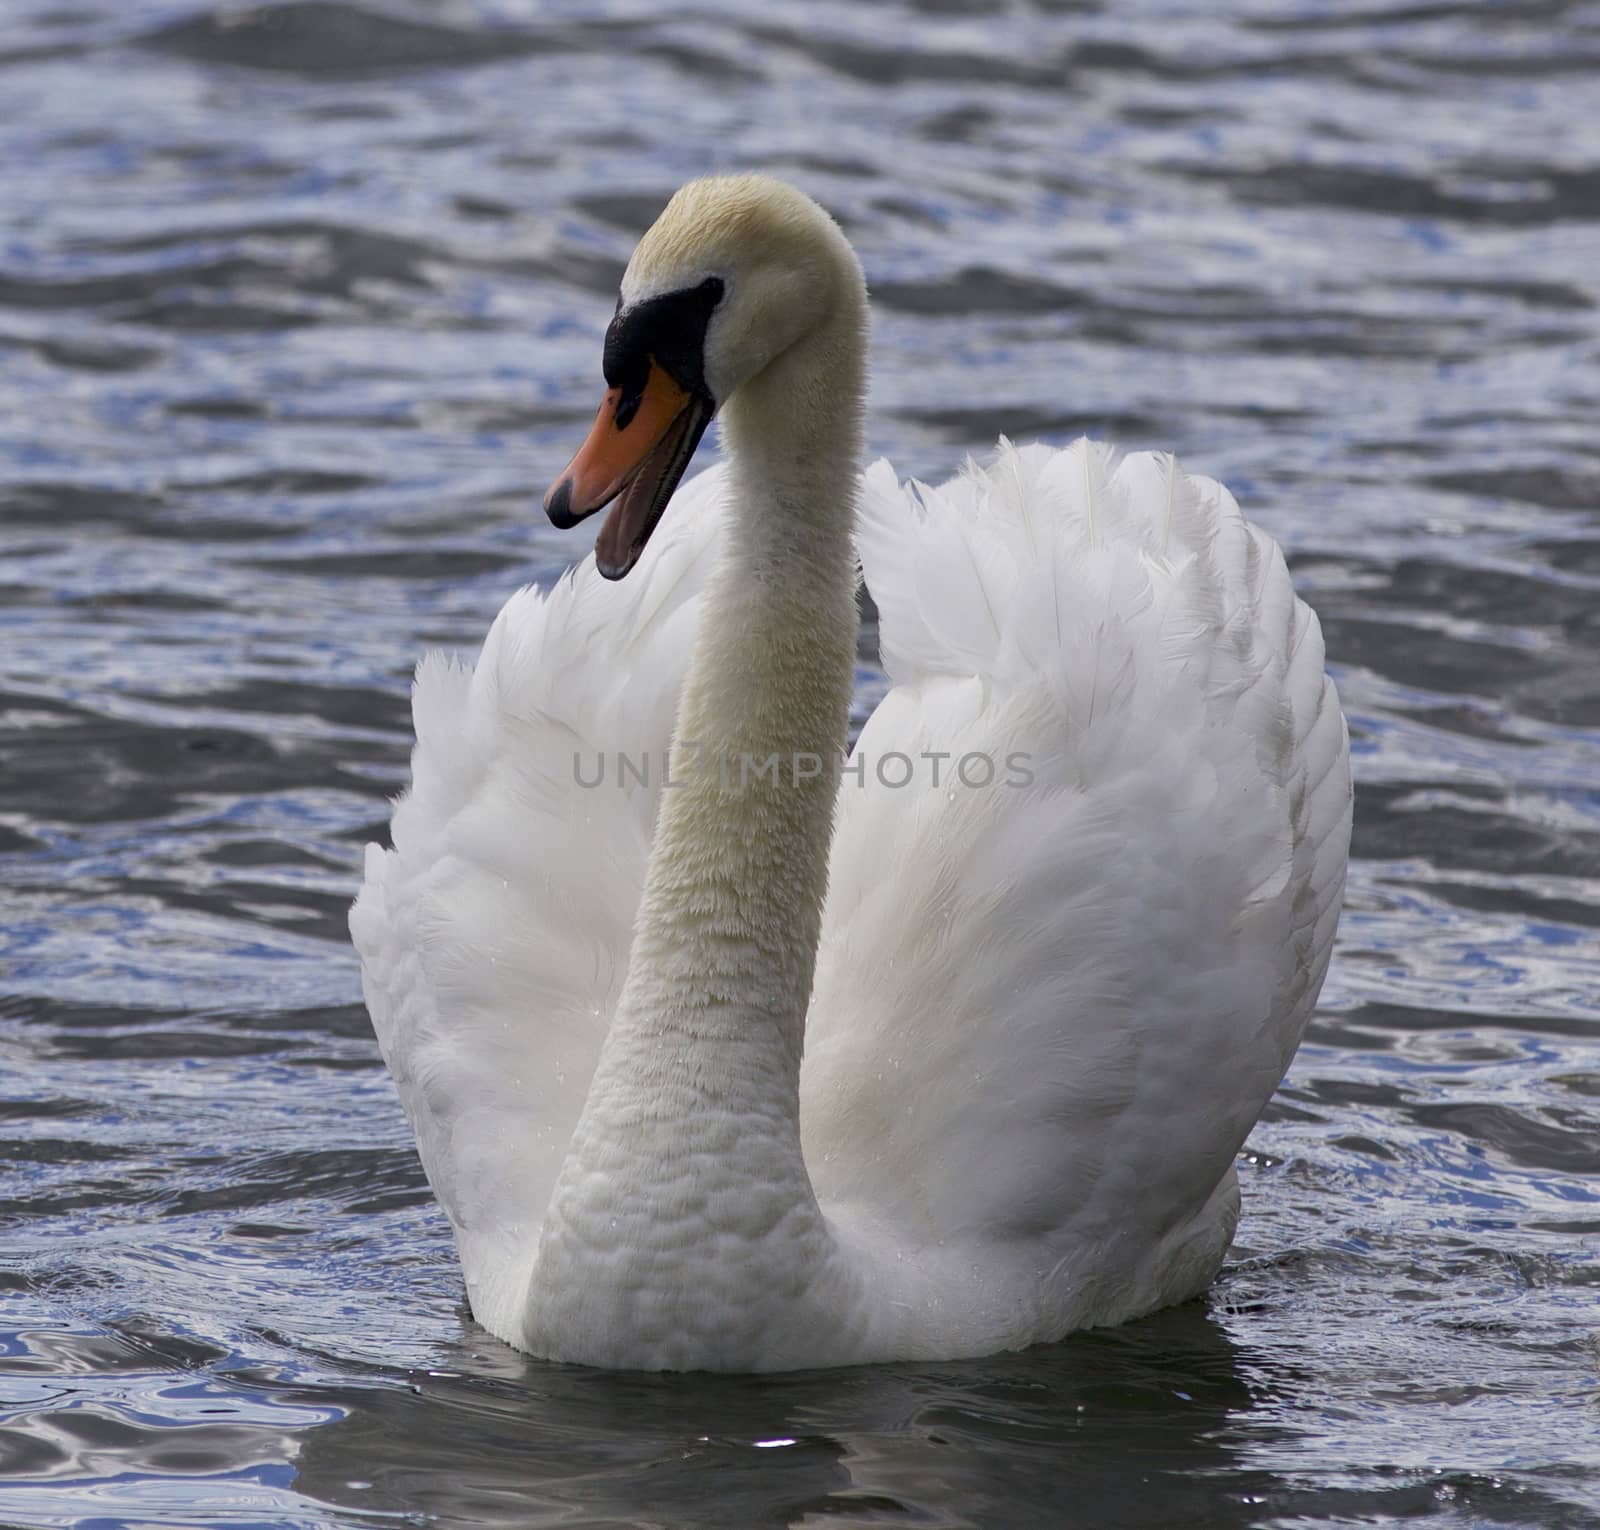 Beautiful photo of a screaming swan by teo